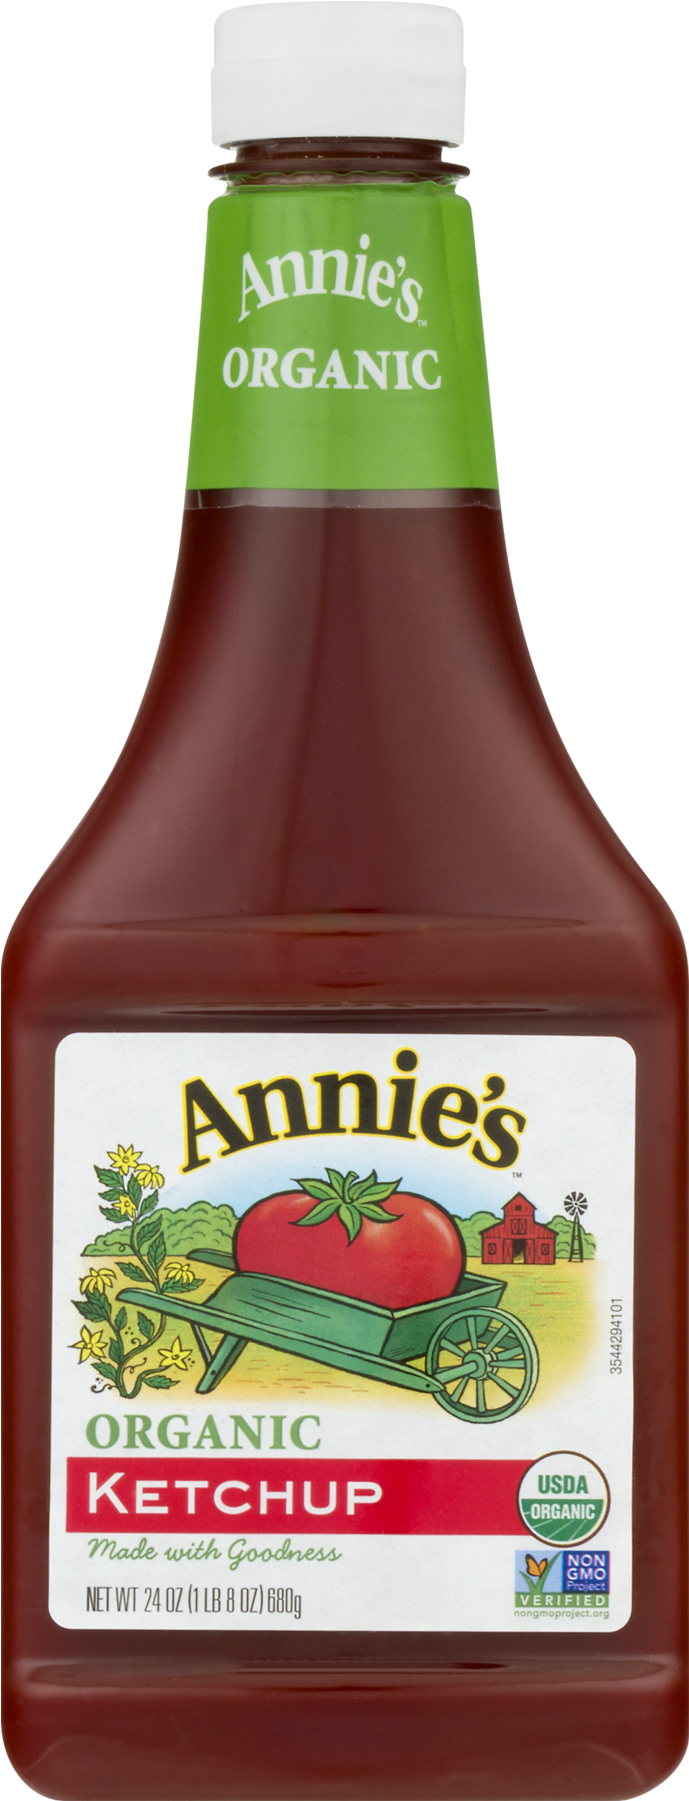 A Bottle Of Ketchup With A Label